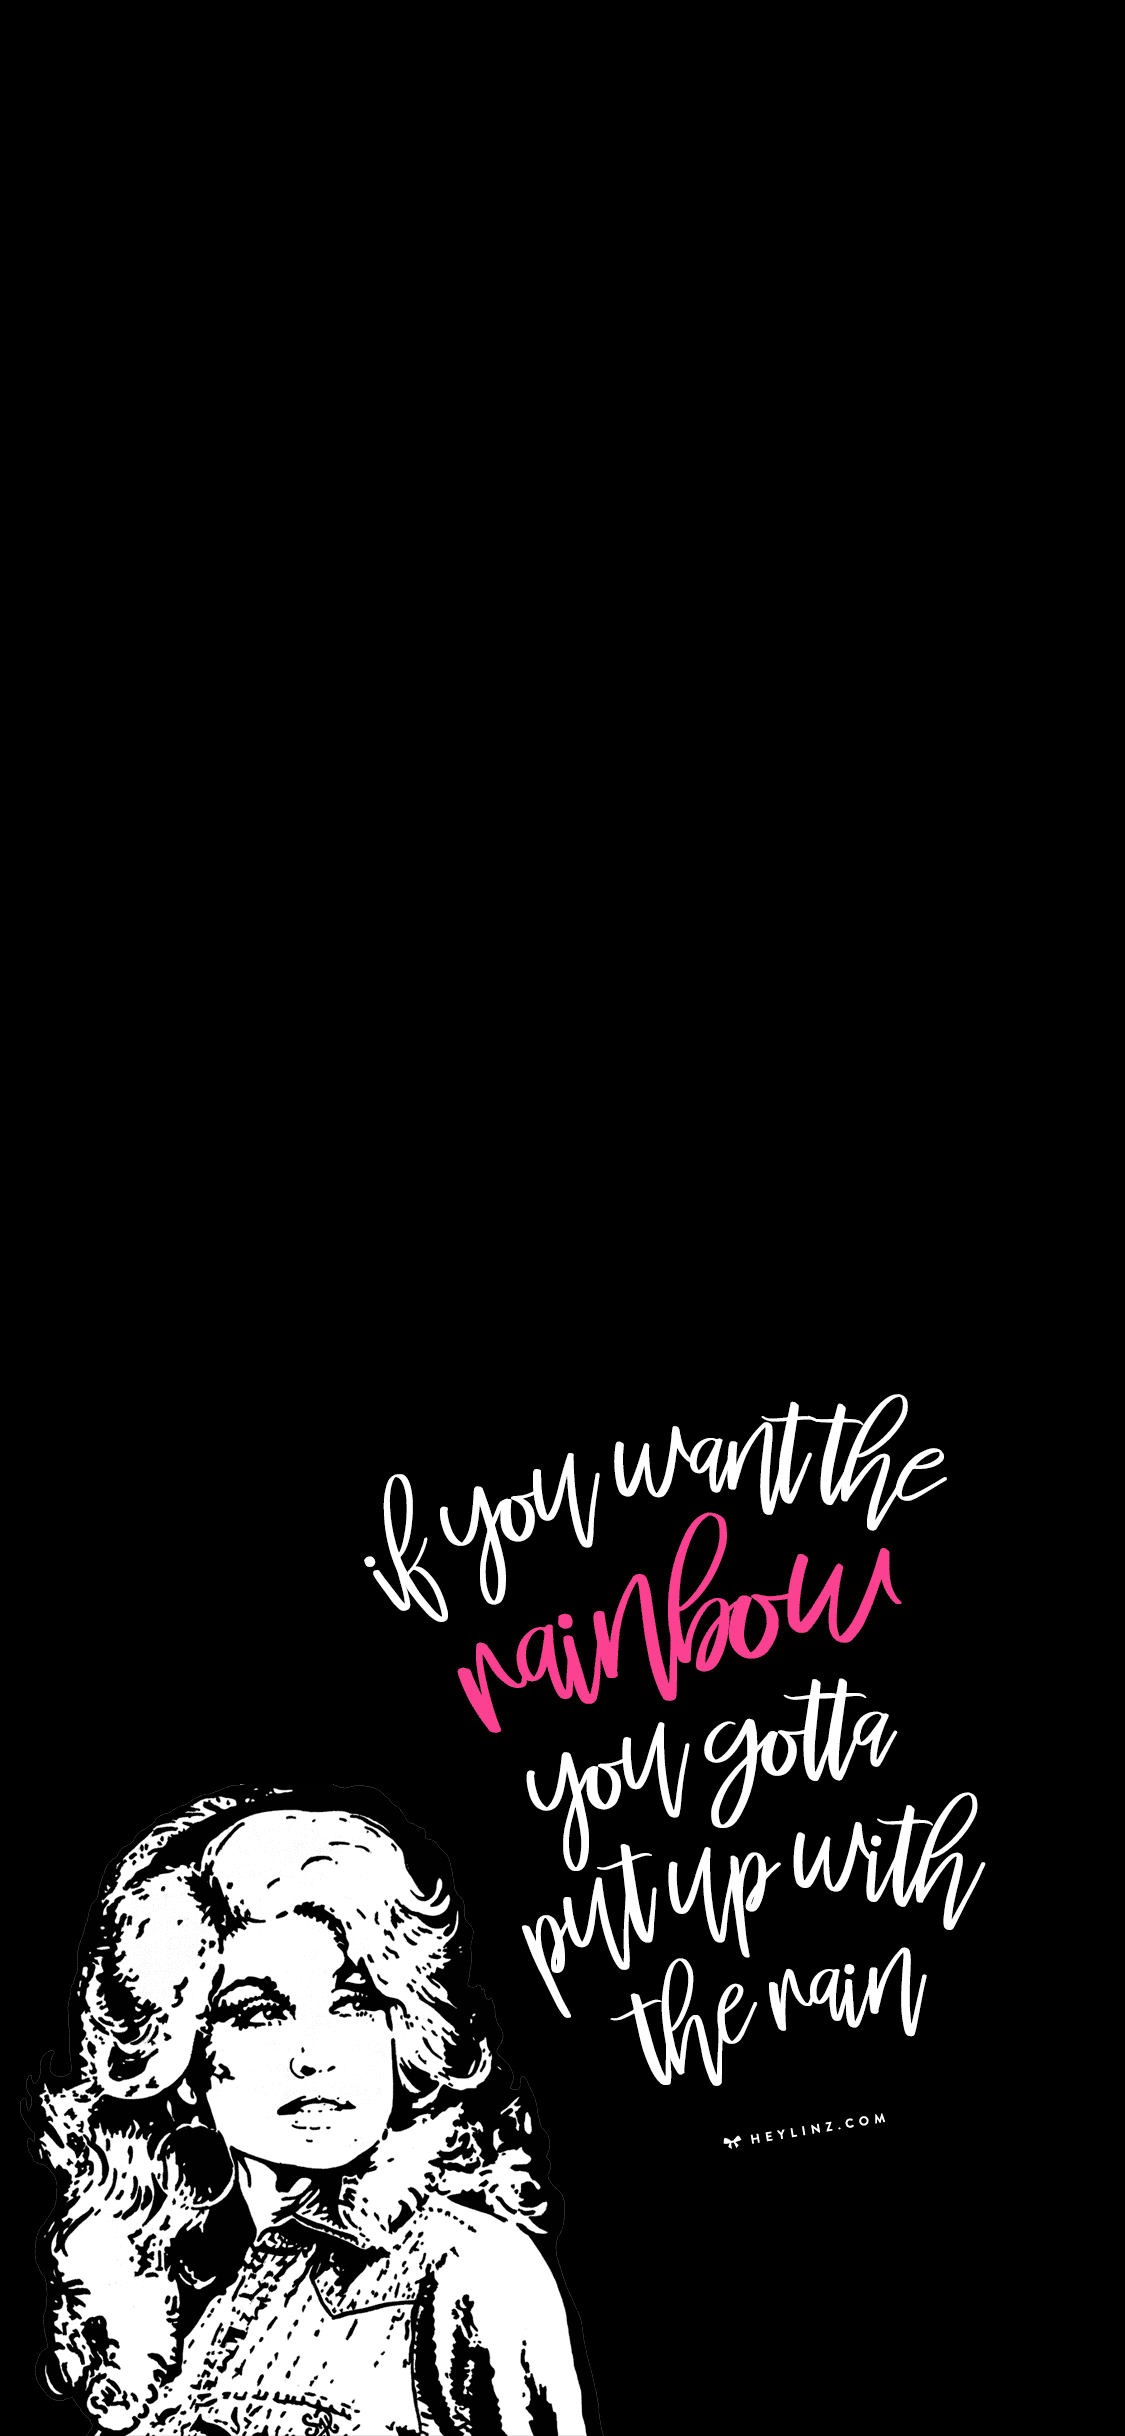 iPhone Wallpaper and Backgrounds - Hey Linz